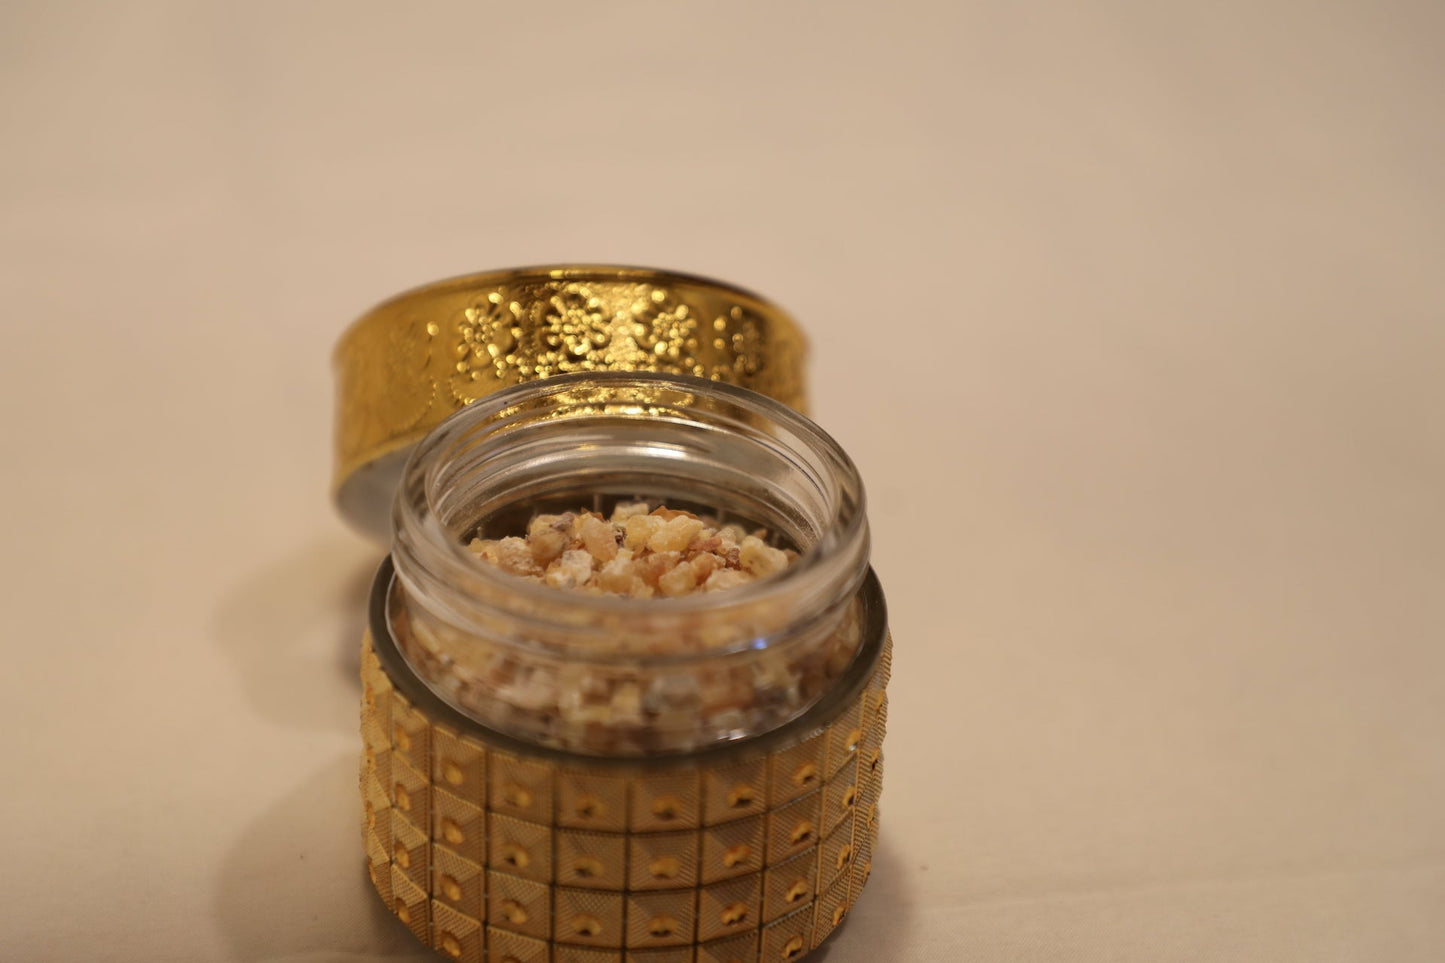 Glass Jar with Gold Decal Printing Extras Grmawit 